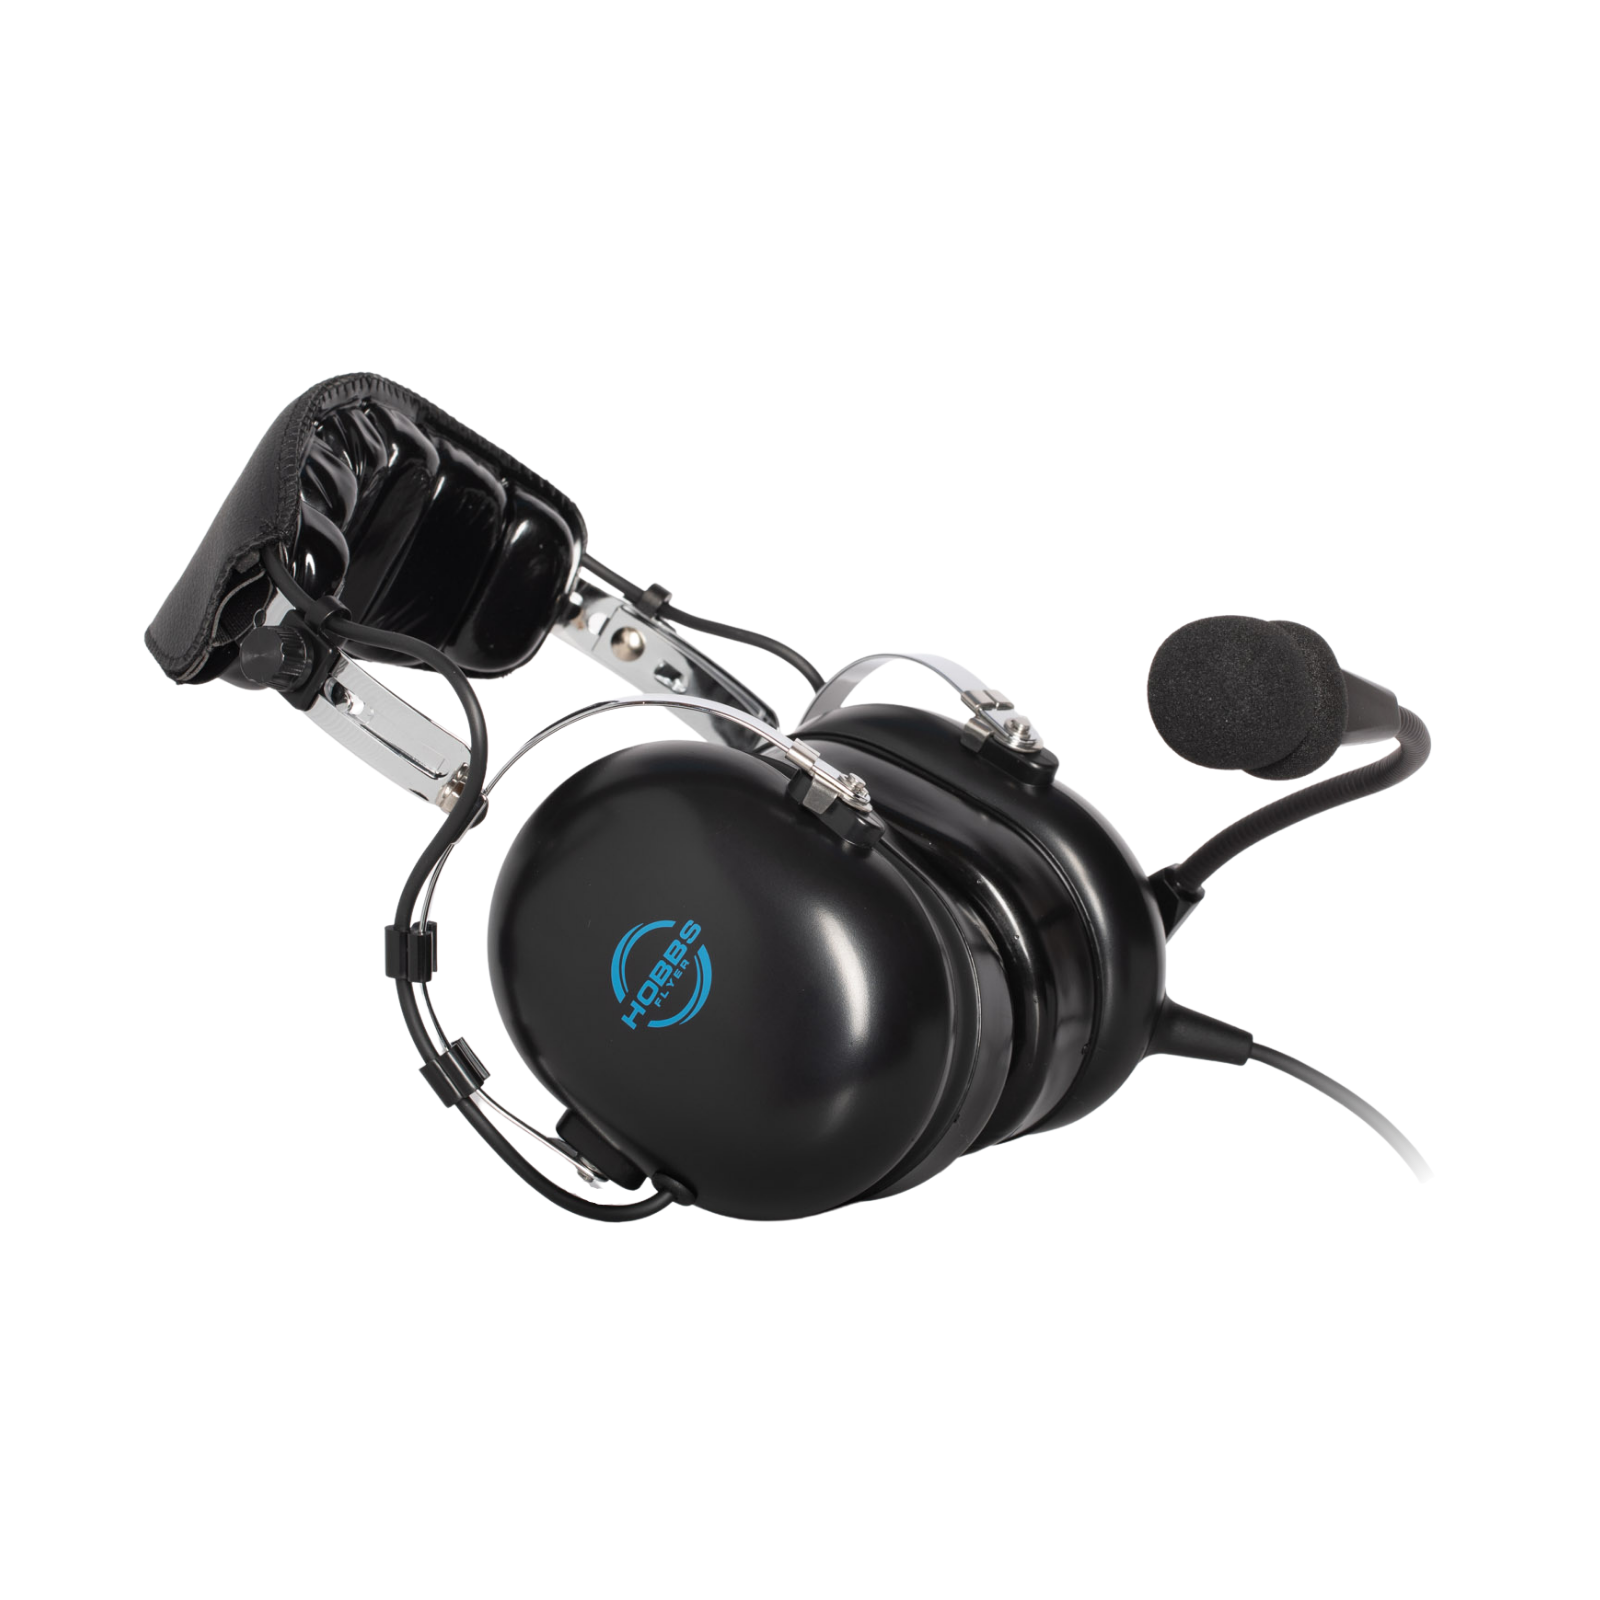 Hobbs Flyer H2 Active ANR Aviation Headset (with Bluetooth)